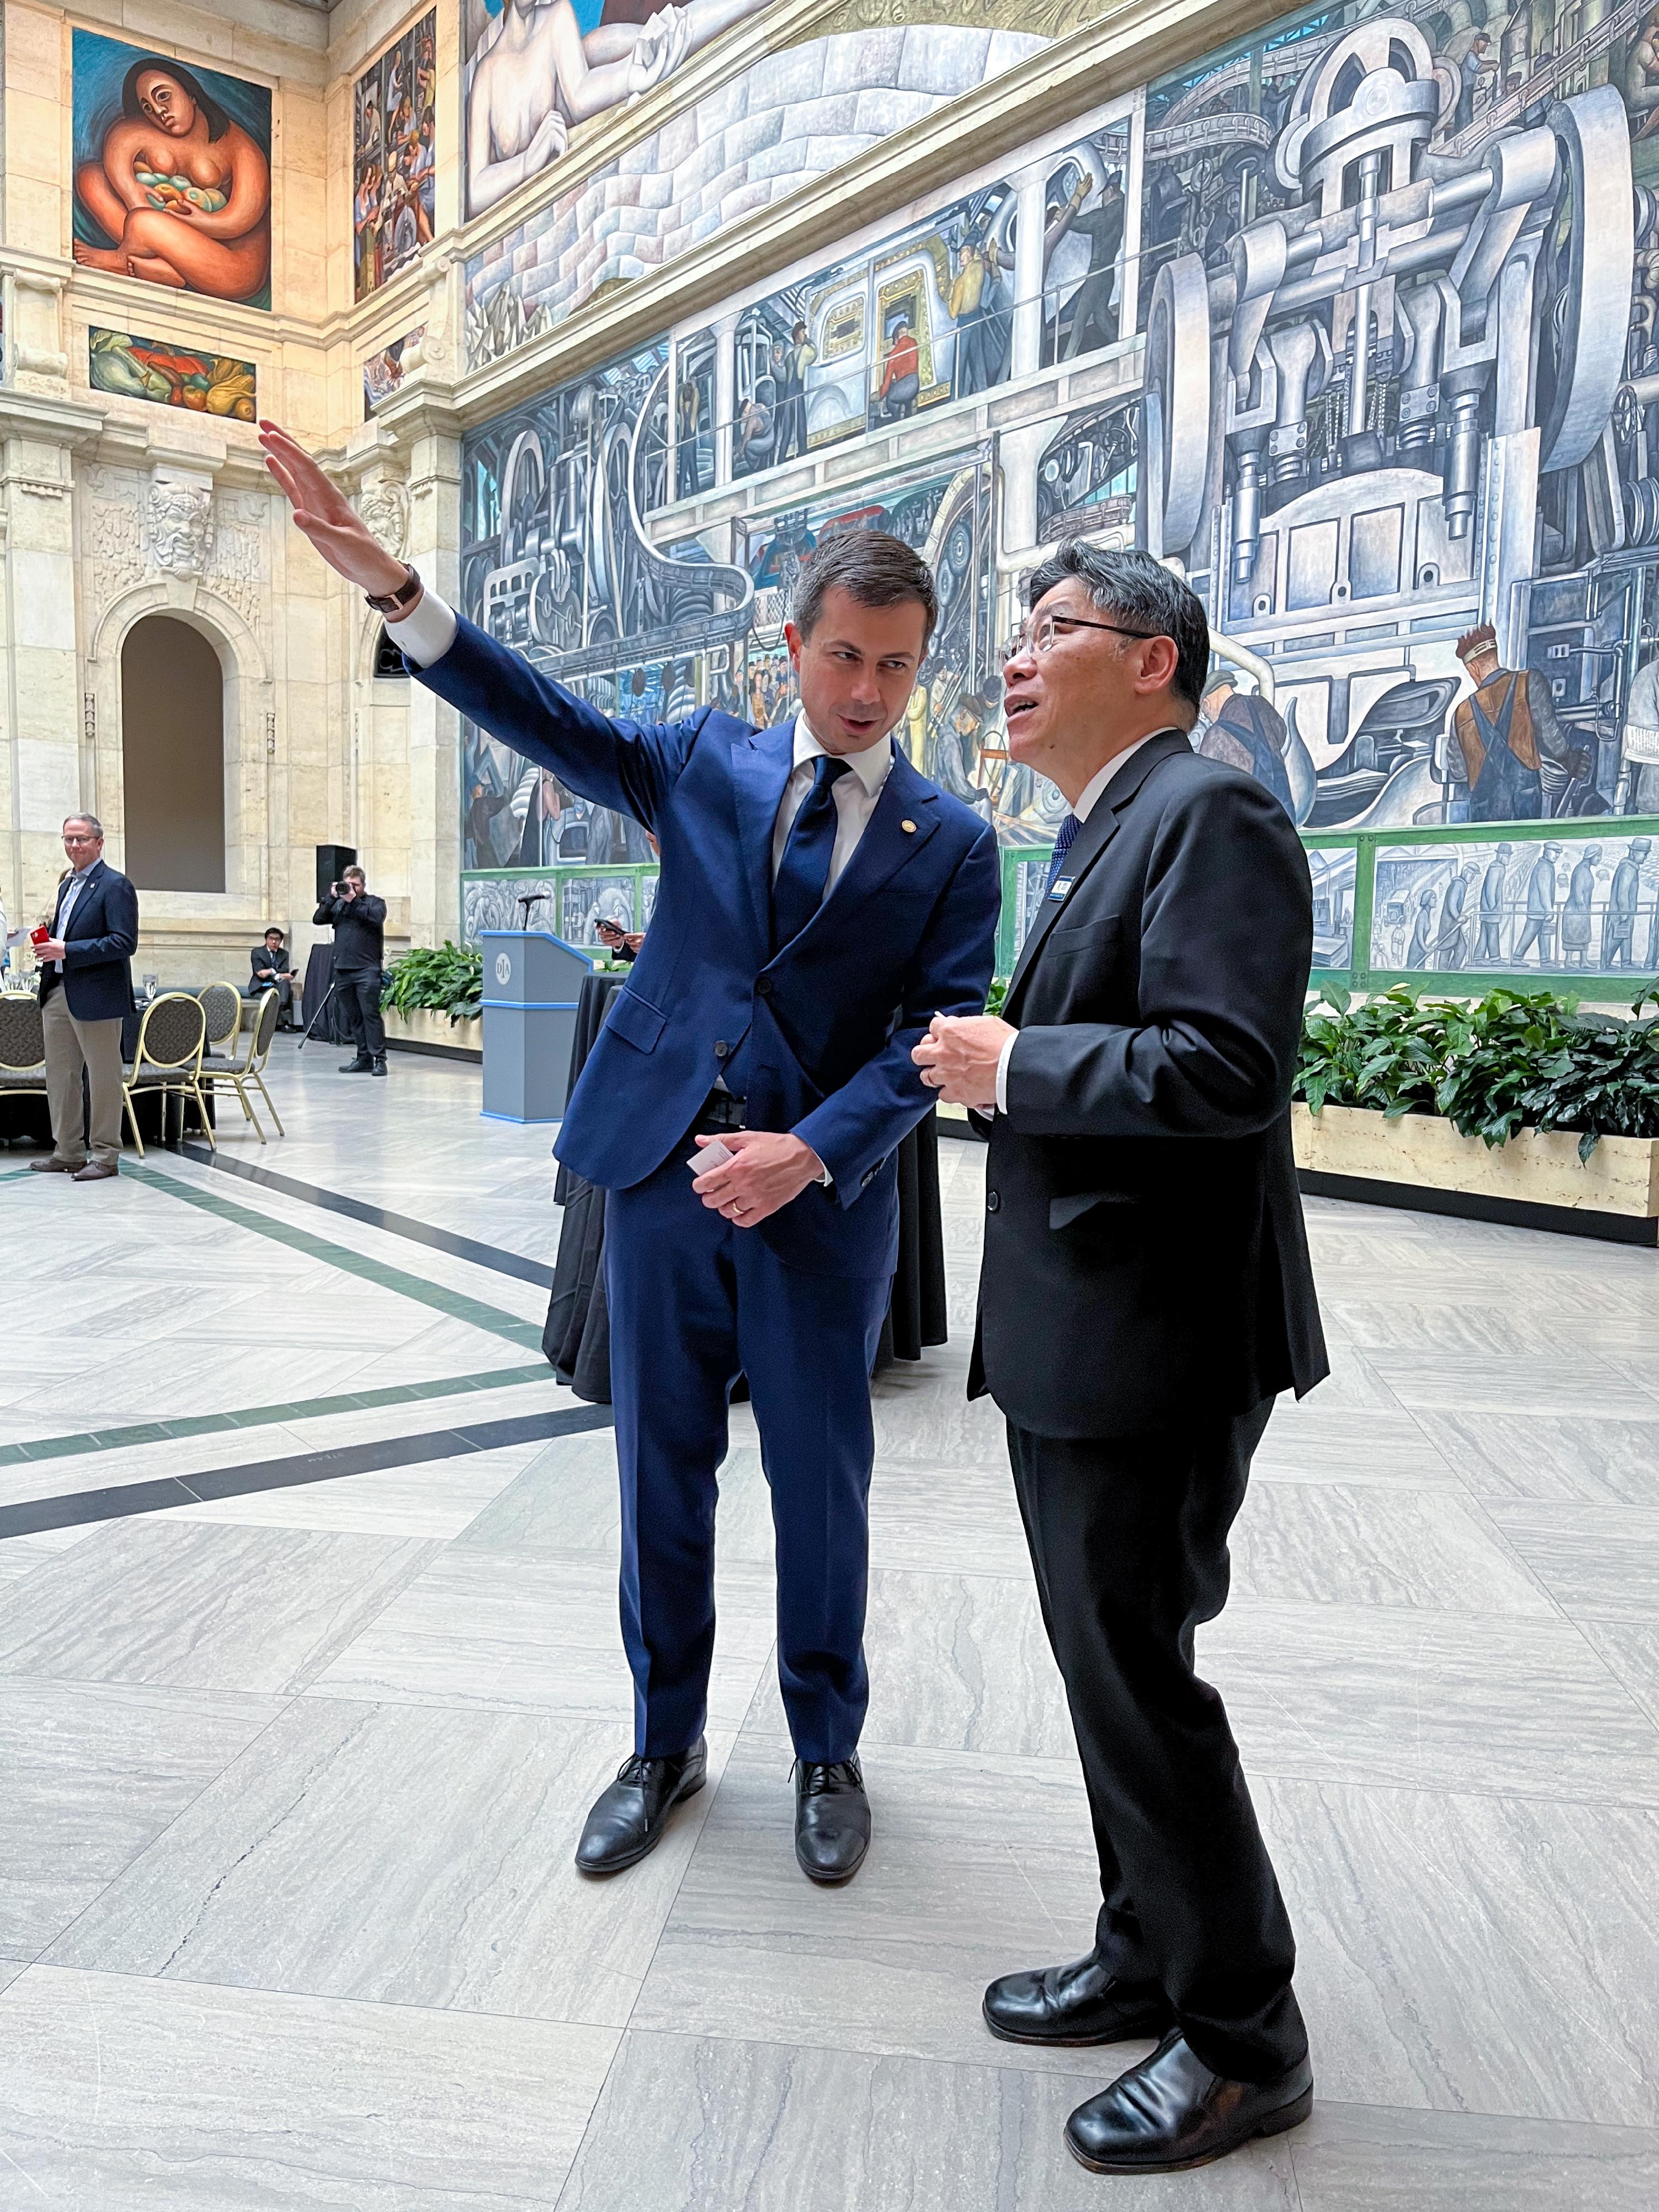 The Secretary for Transport and Logistics, Mr Lam Sai-hung, attended the ministerial dinner of the 11th Asia-Pacific Economic Cooperation (APEC) Transportation Ministerial Meeting in Detroit, the United States (US), today (May 16, US time). Photo shows Mr Lam (right) being briefed by the representative of the APEC host economy, the Secretary of Transportation of the US, Mr Pete Buttigieg (left), on the venue, the Detroit Institute of Arts.